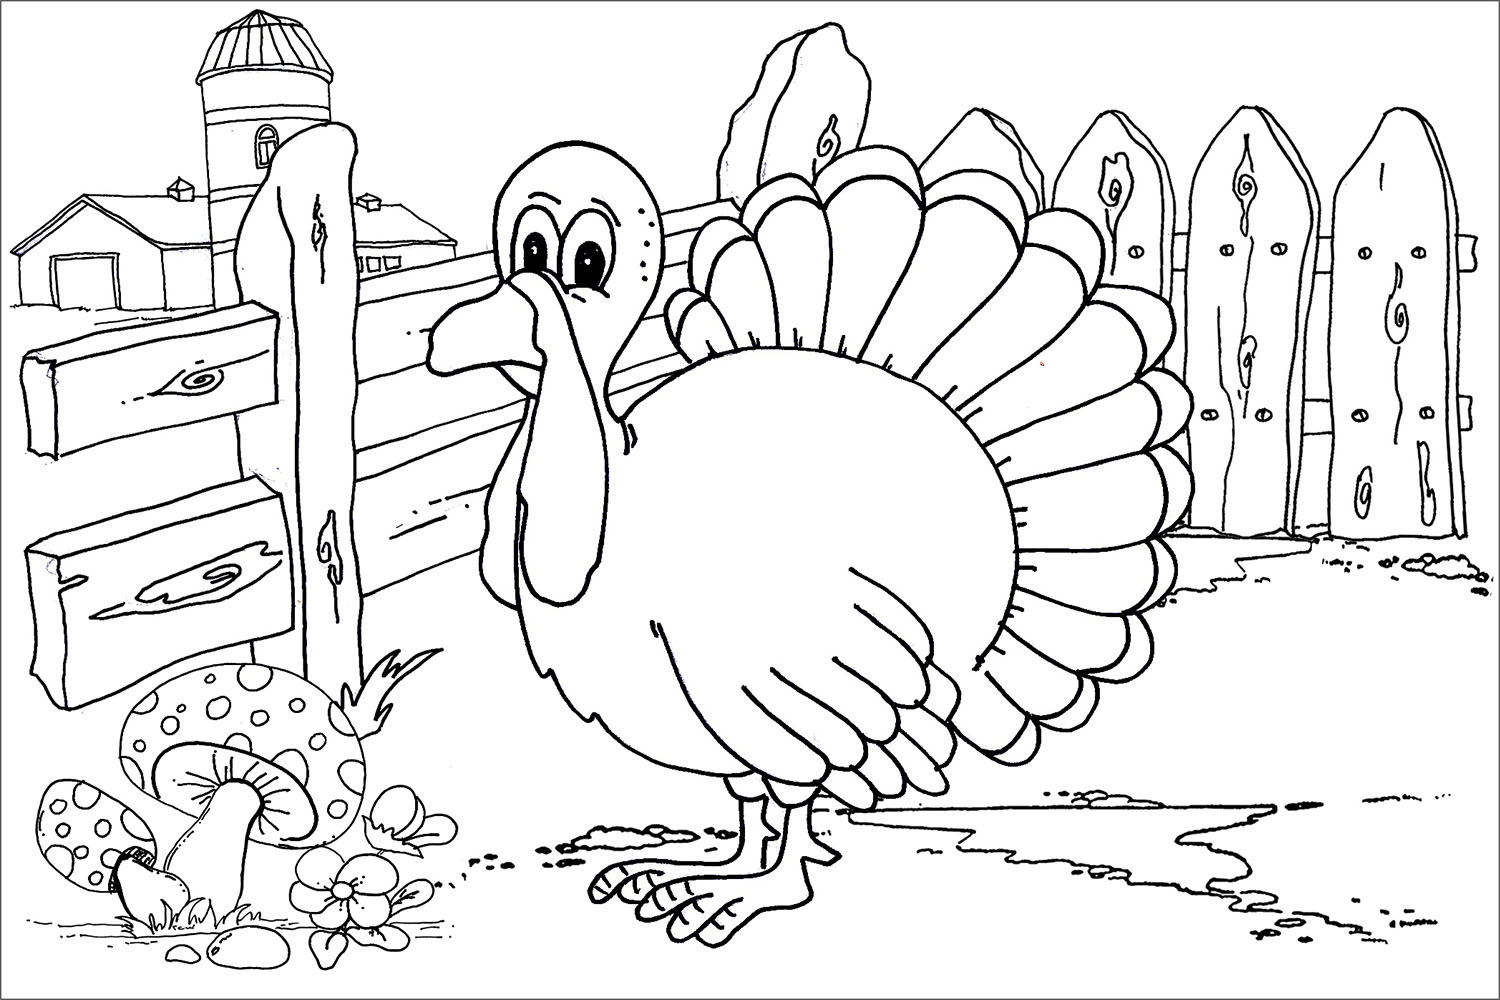 Turkey Coloring Pages to download and print for free